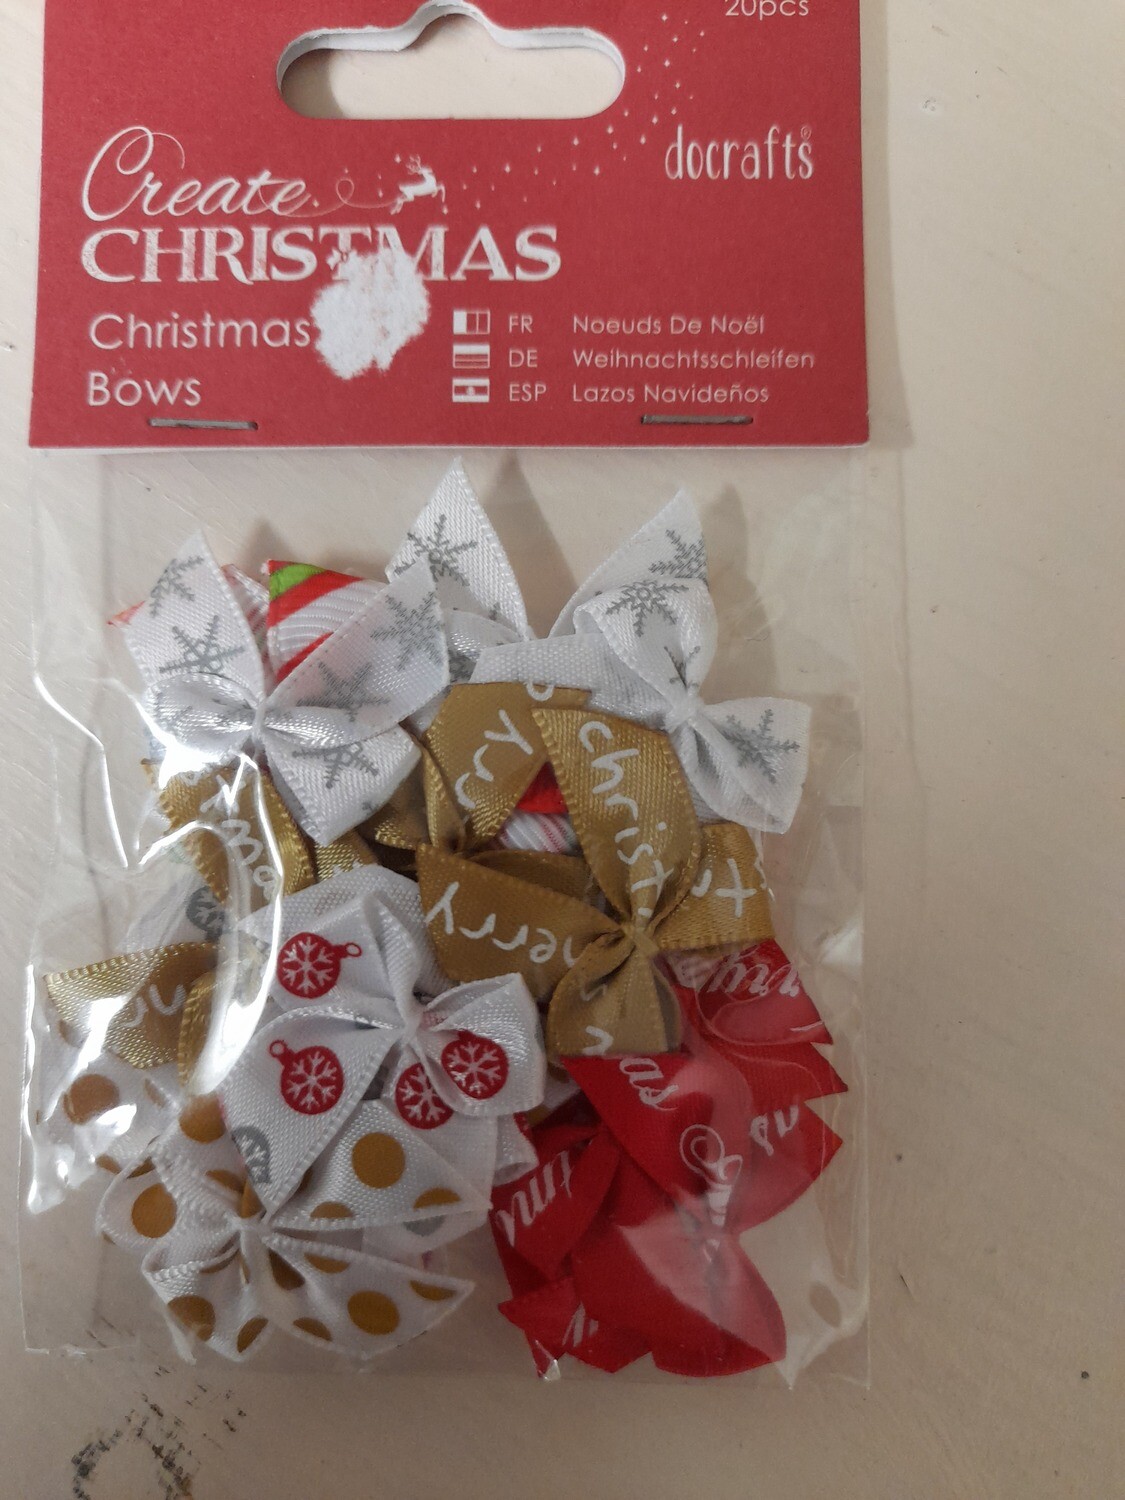 DoCrafts Create Christmas - Christmas Bows Now £1.50